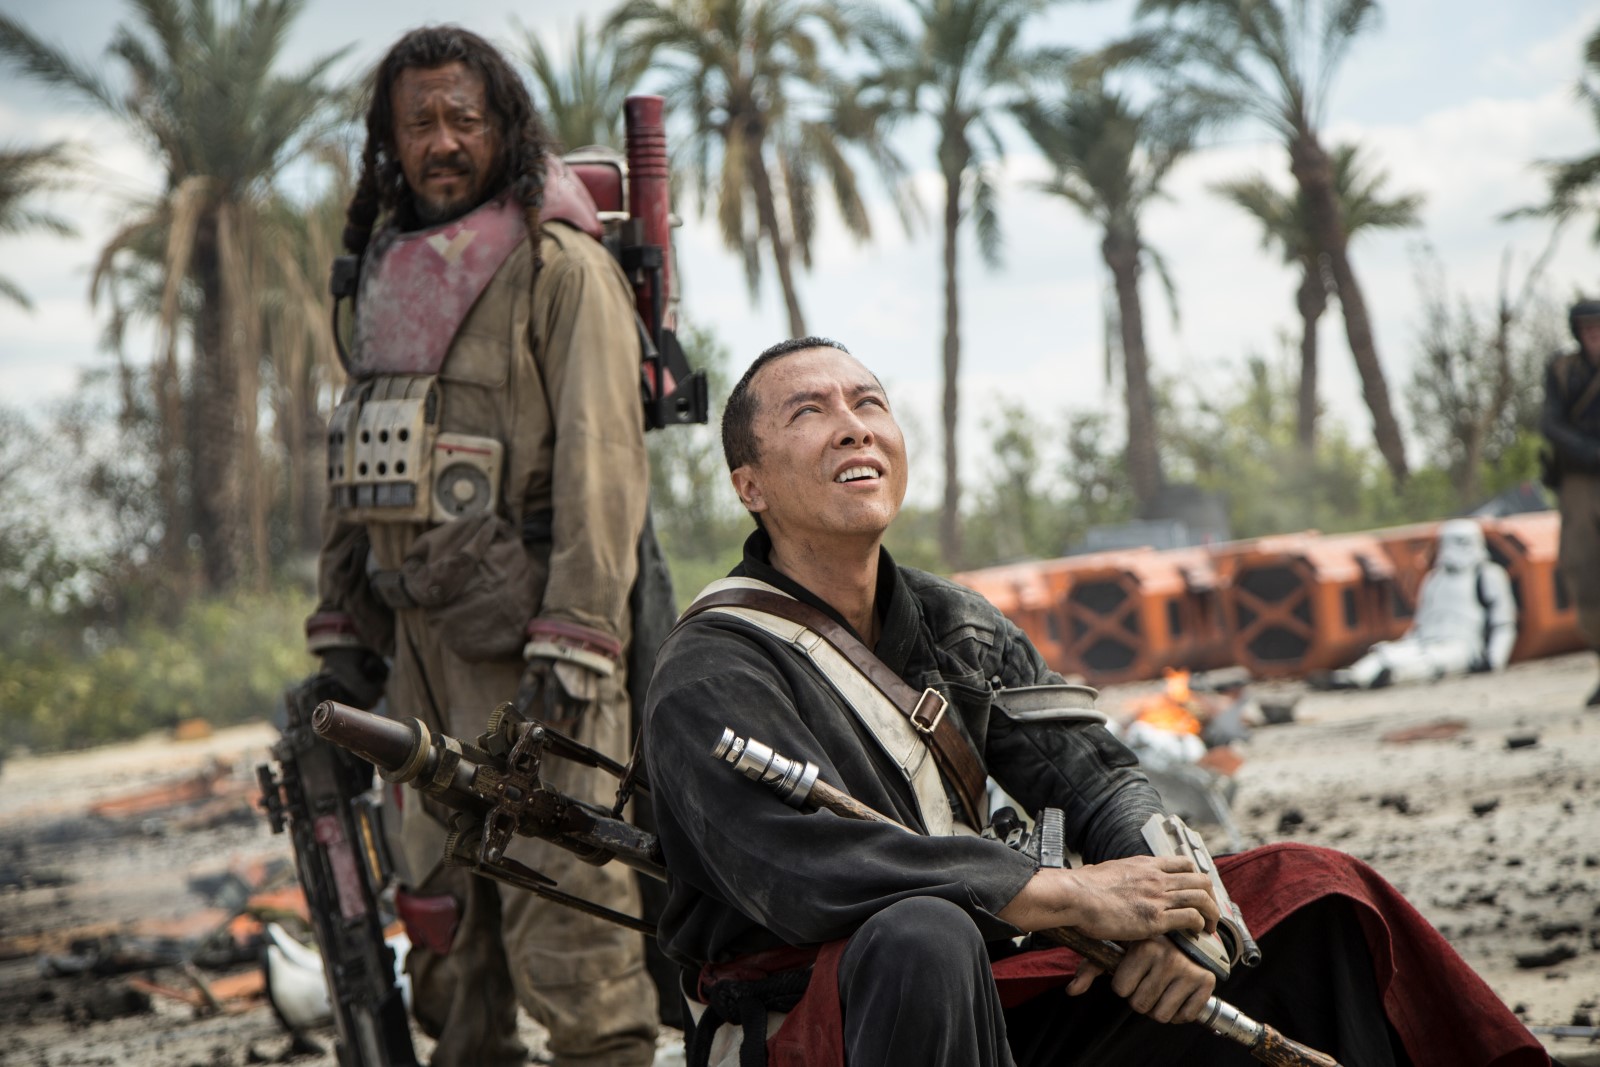 Rogue One: A Star Wars Story L to R: Baze Malbus (Jiang Wen) and Chirrut Imwe (Donnie Yen) Ph: Jonathan Olley ©Lucasfilm LFL 2016.